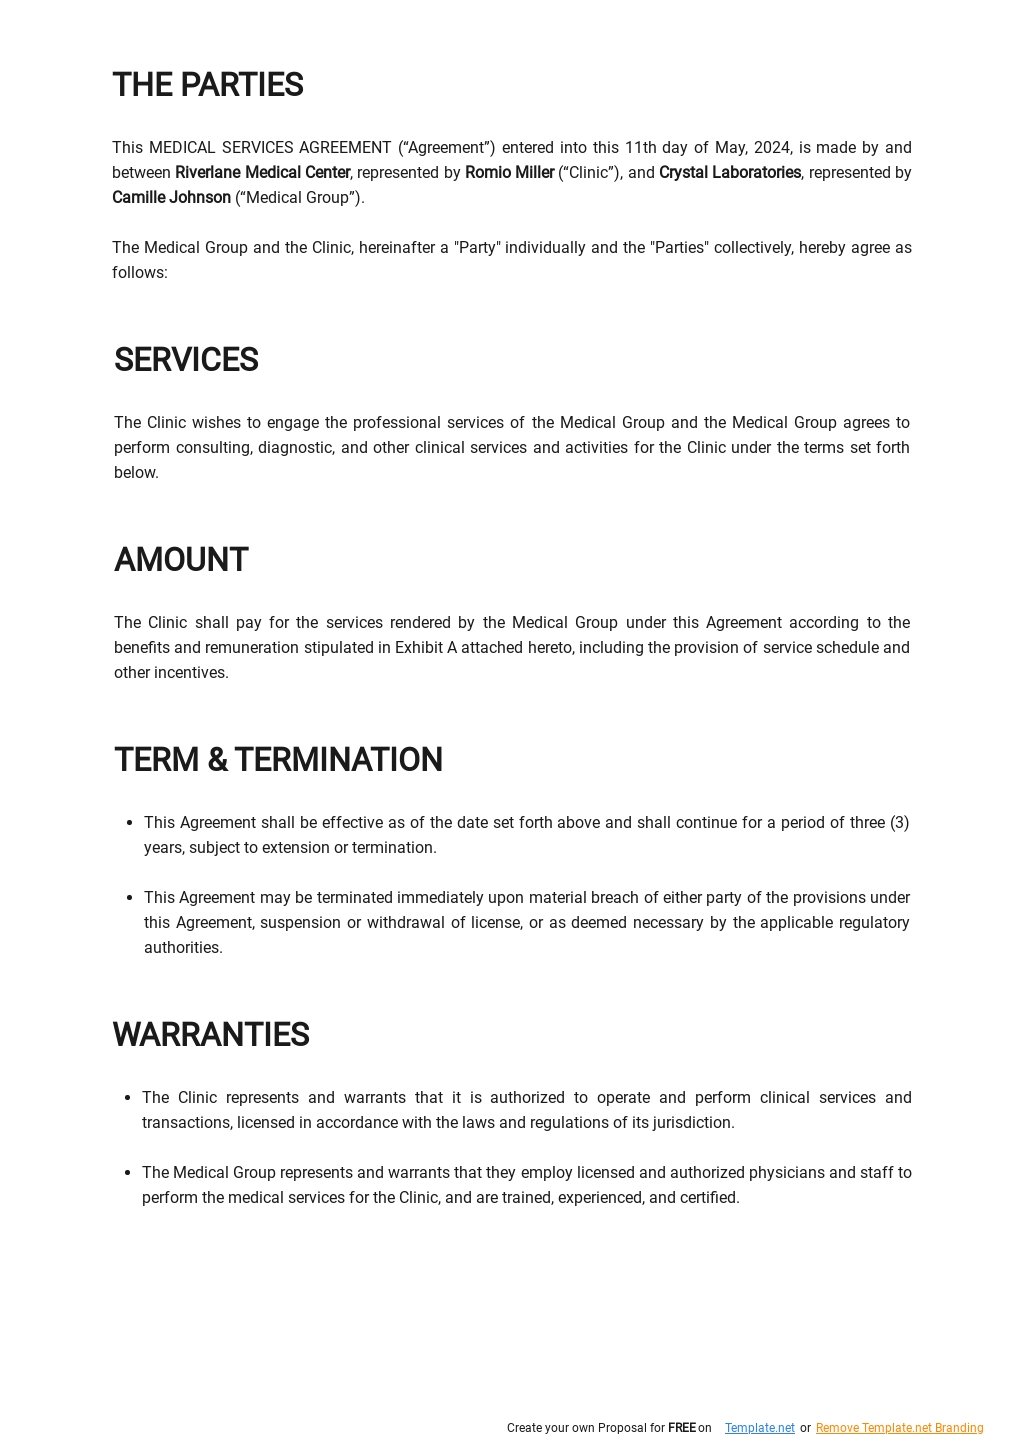 Medical Services Agreement Template 1.jpe